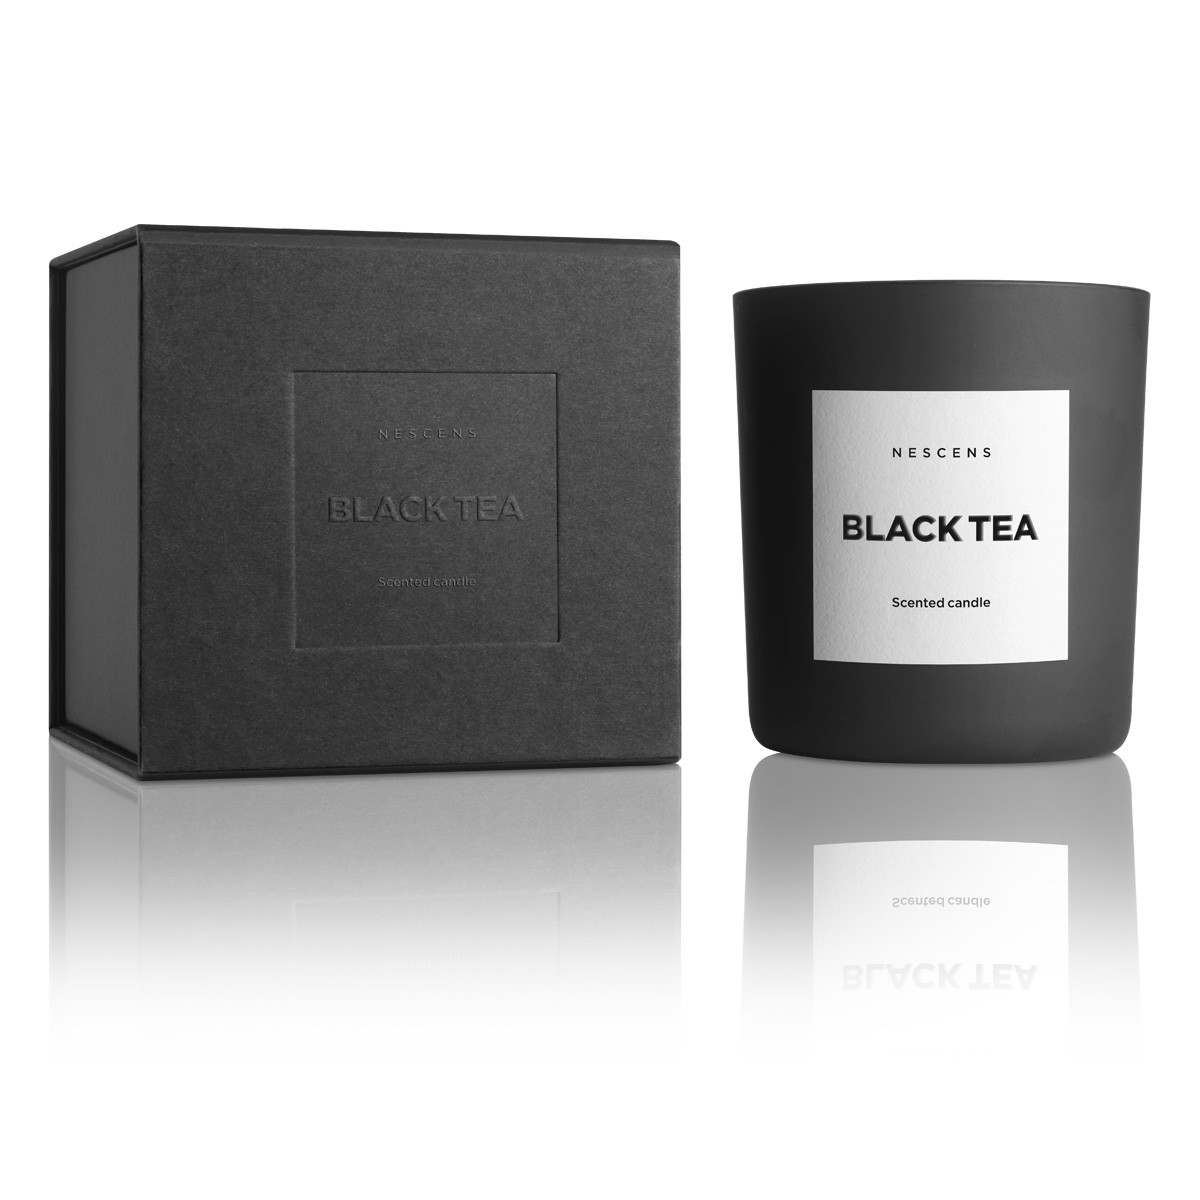 Scented candle - packaging - Black Tea